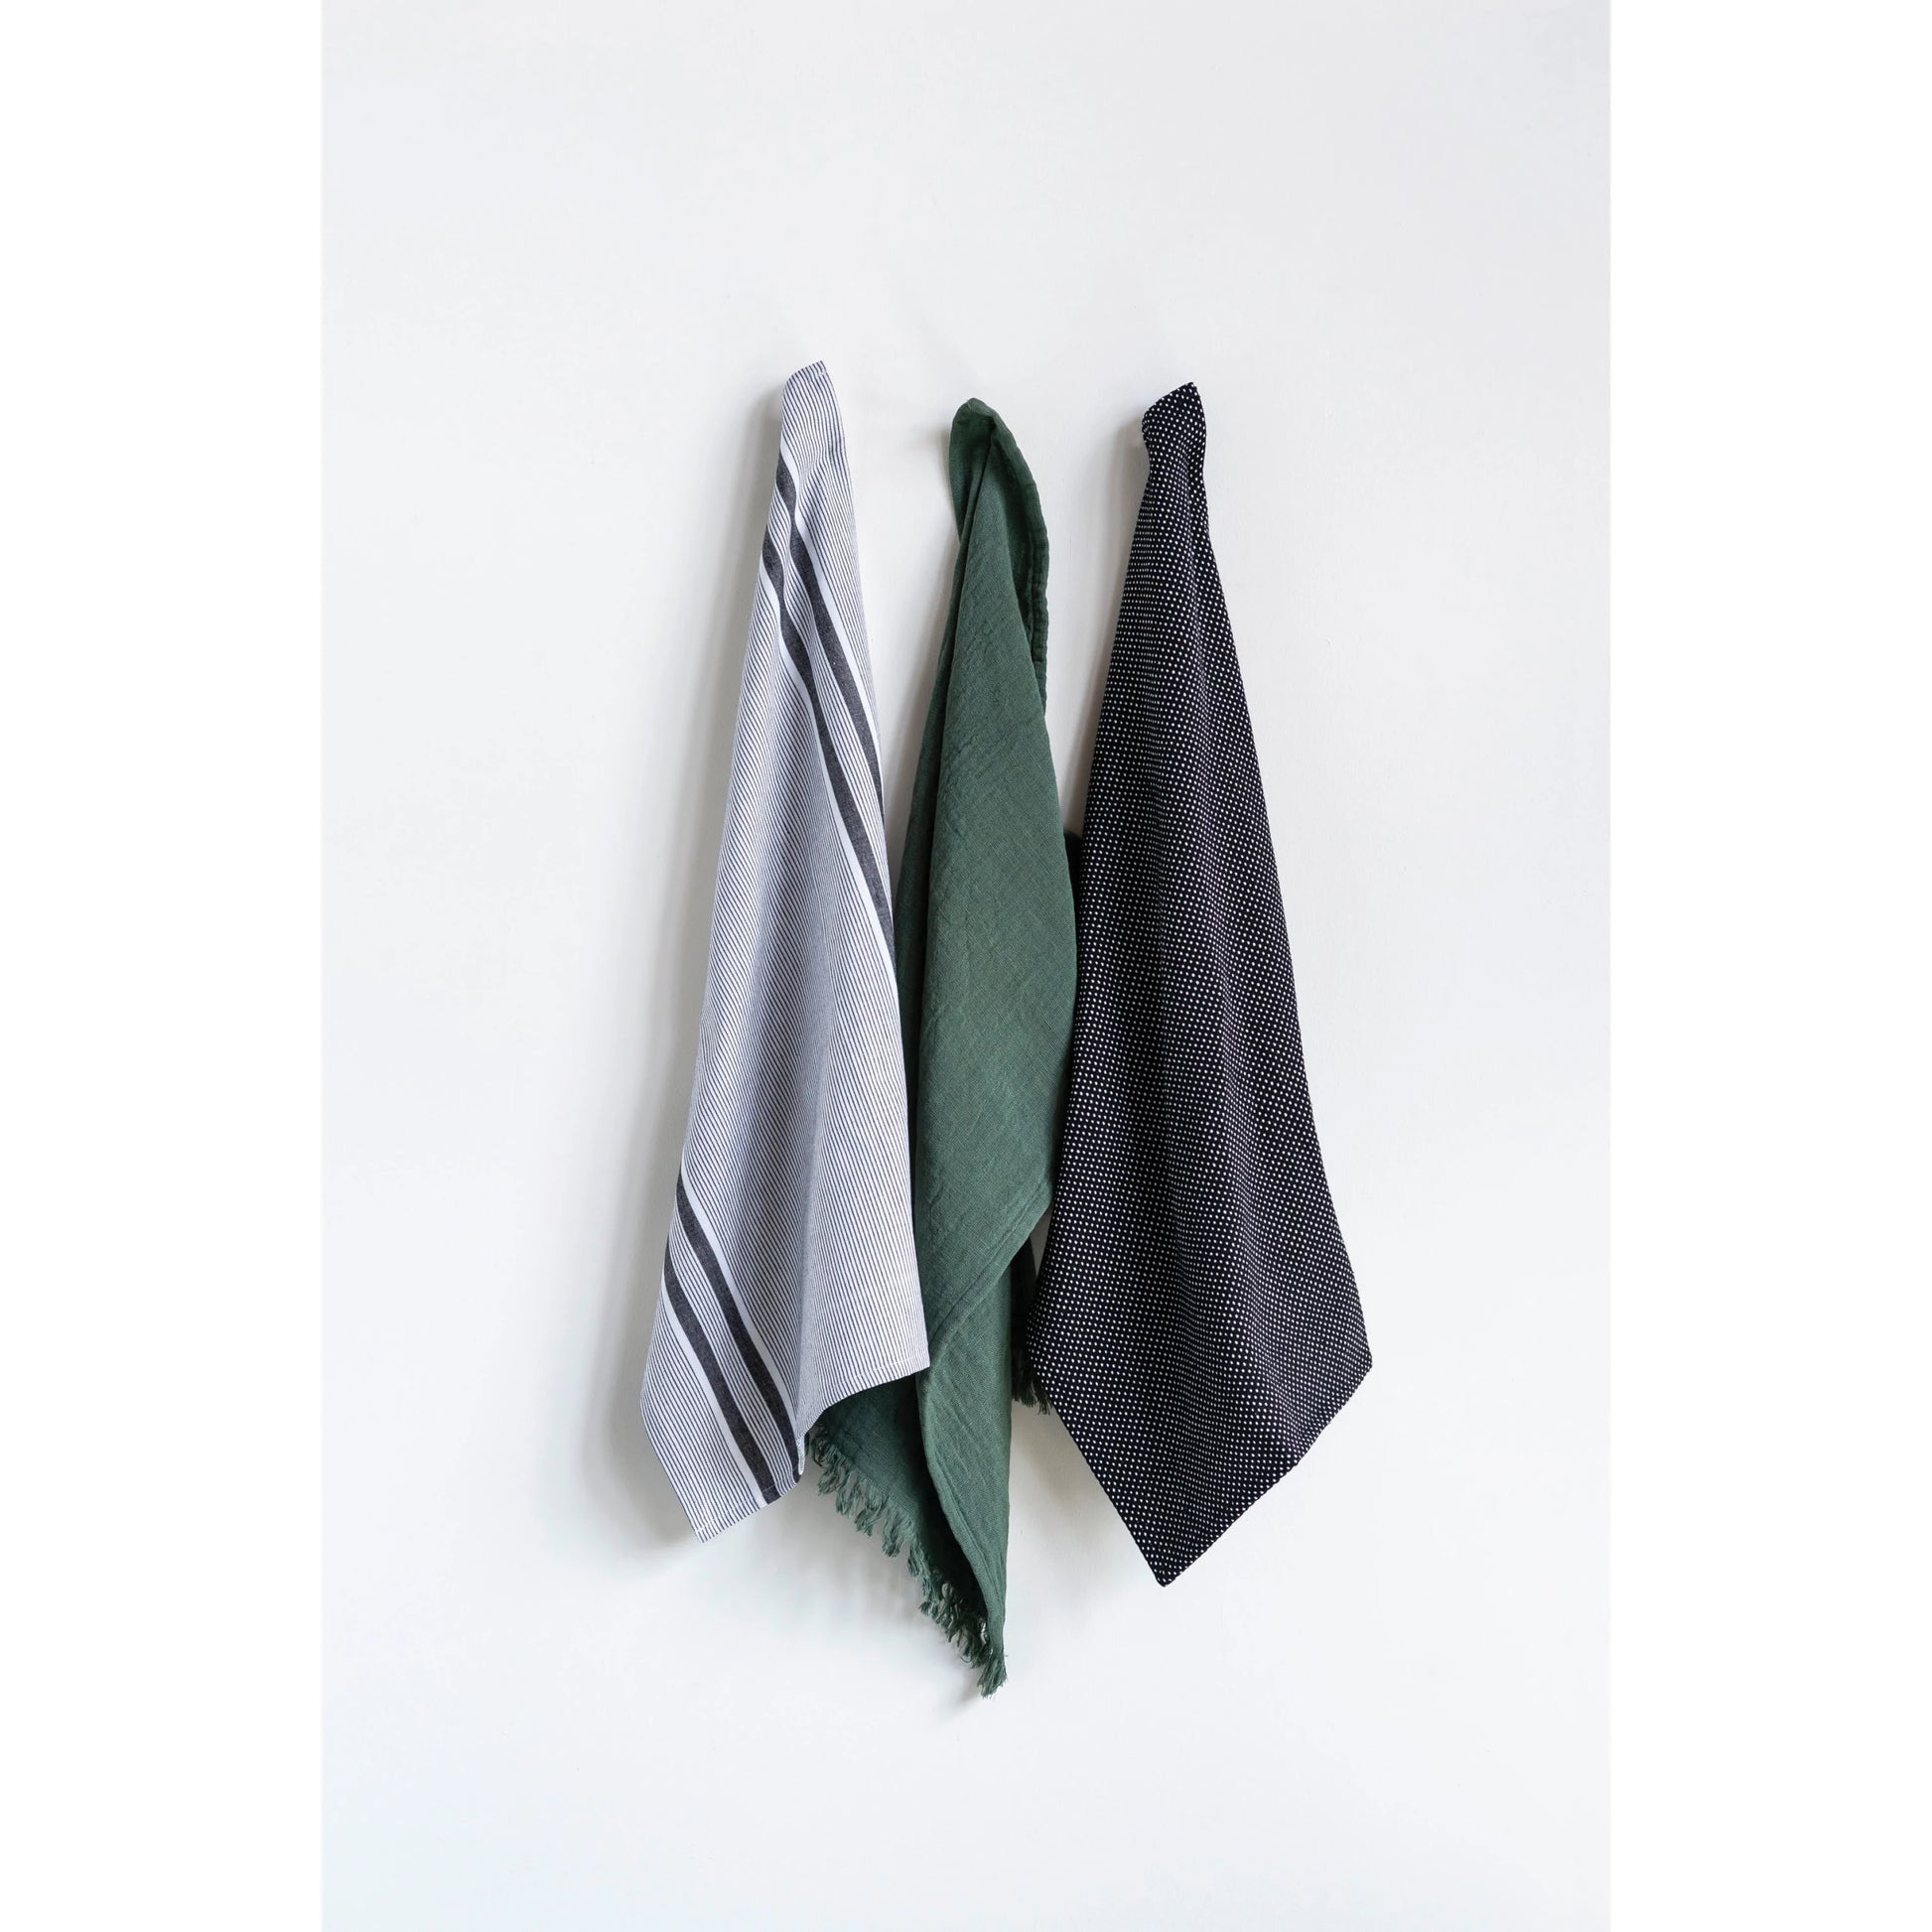 Your Kitchen: Where to Stash the Dish Towels